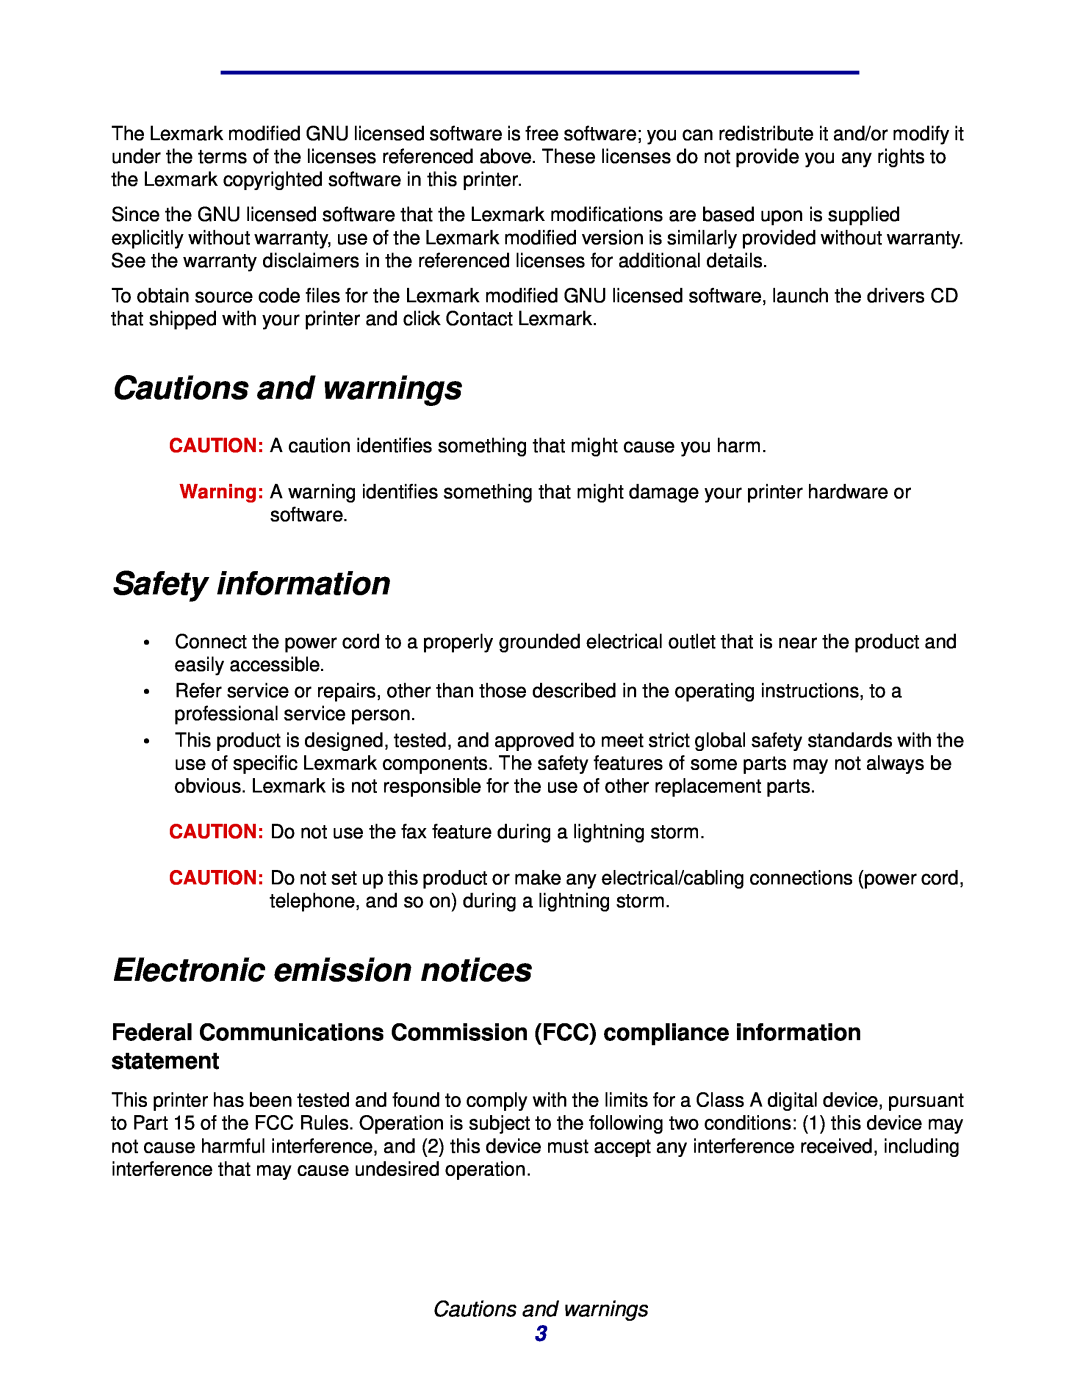 Lexmark 912 manual Cautions and warnings, Safety information, Electronic emission notices 